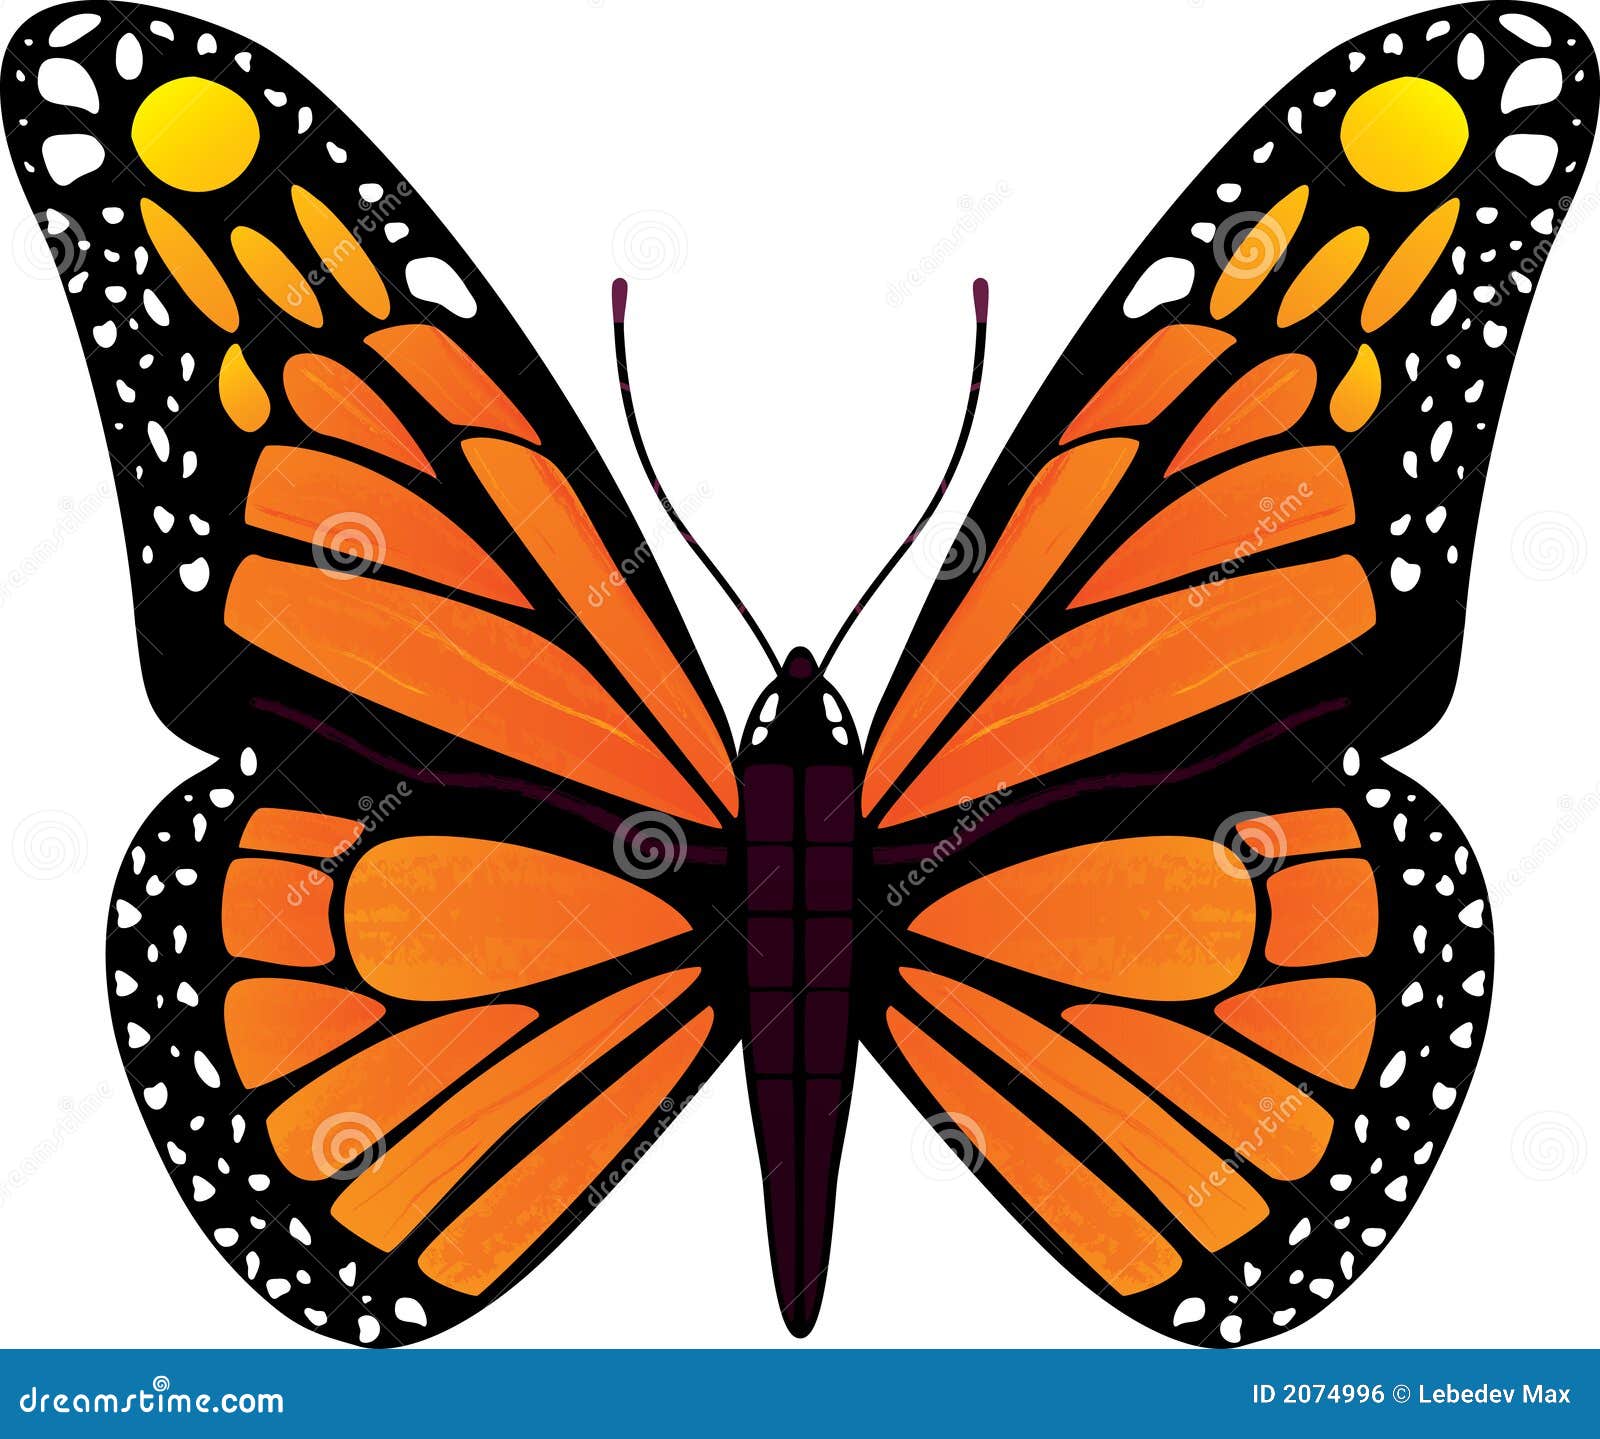 butterfly clipart no background - photo #37